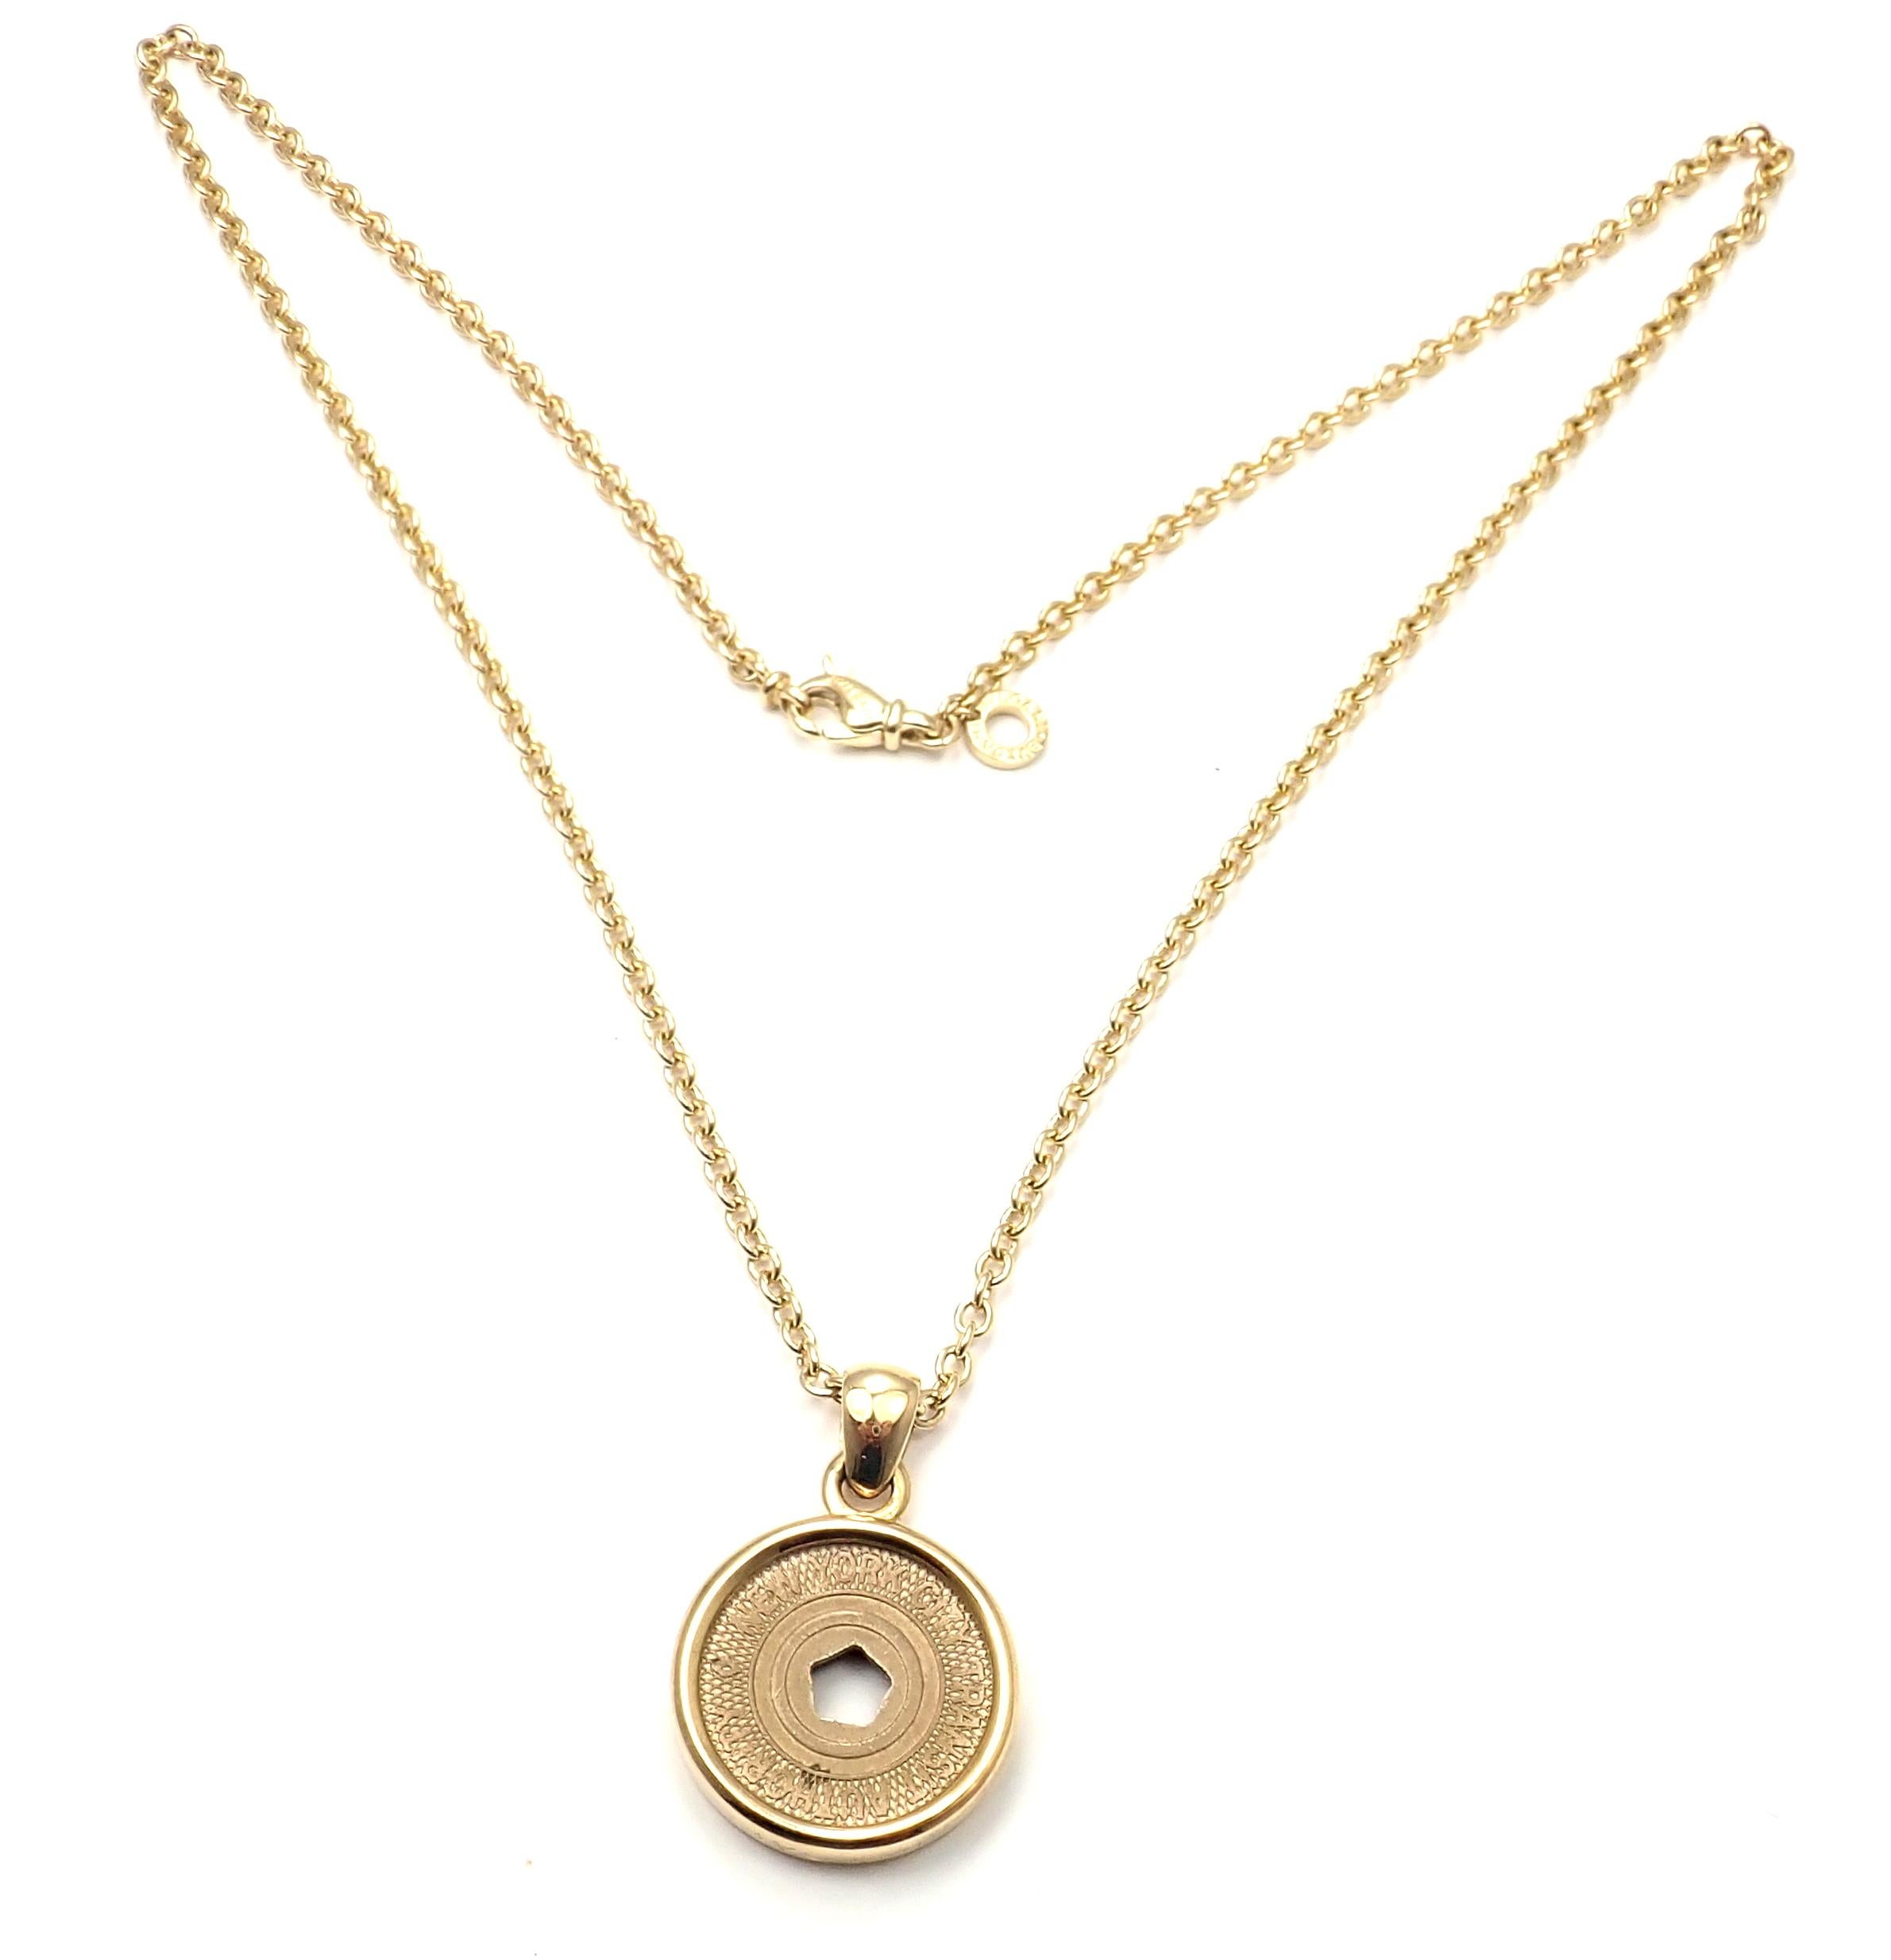 18k Yellow Gold NYC Subway Token Limited Edition Pendant Necklace by Bulgari. 
Details:
Weight: 21.1 grams
Length: 18